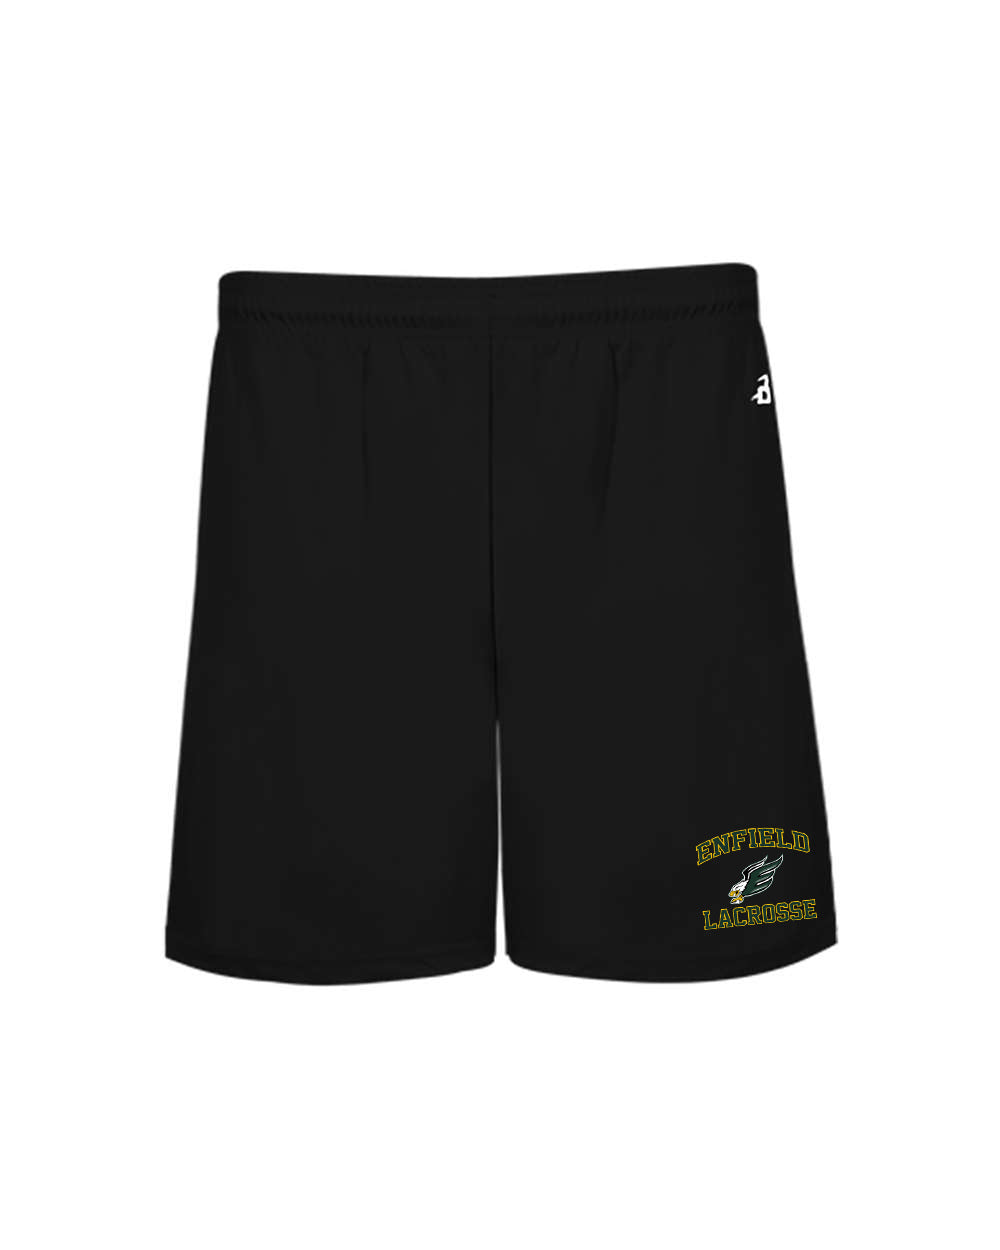 EHL Adult Badger 5inch Seam Shorts "Classic" - 4245 (color options available)